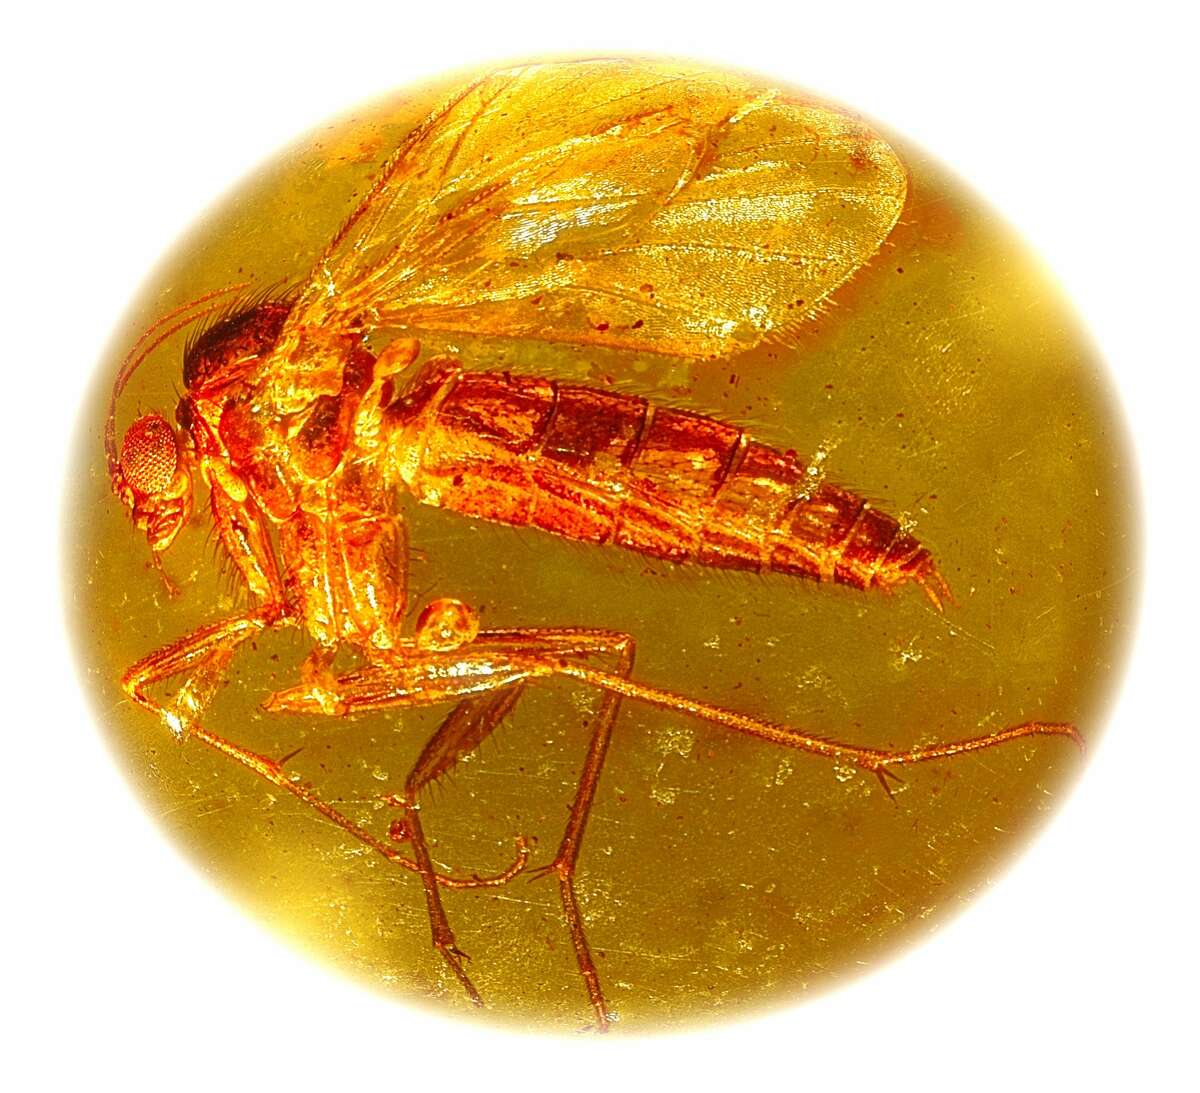 Macrophotograph of a fossilized fungus gnat (Mycetophilidae) embedded in Baltic amber, a fossilized resin, some 30 million years old.